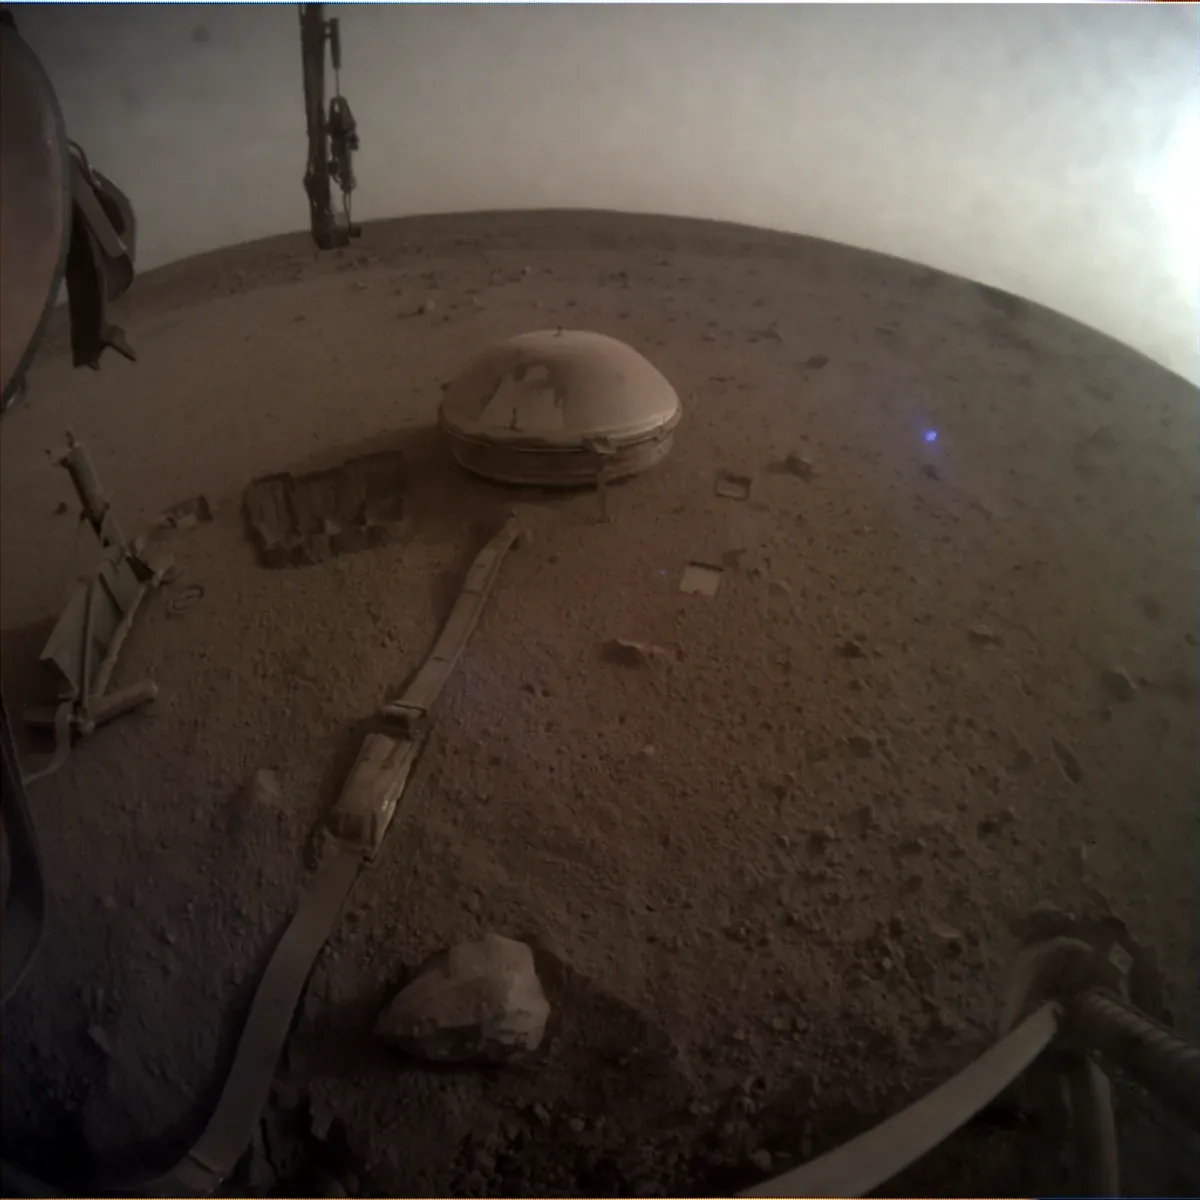 insight-s-seismometer-also-covered-in-dust-like-the-solar-panels-l